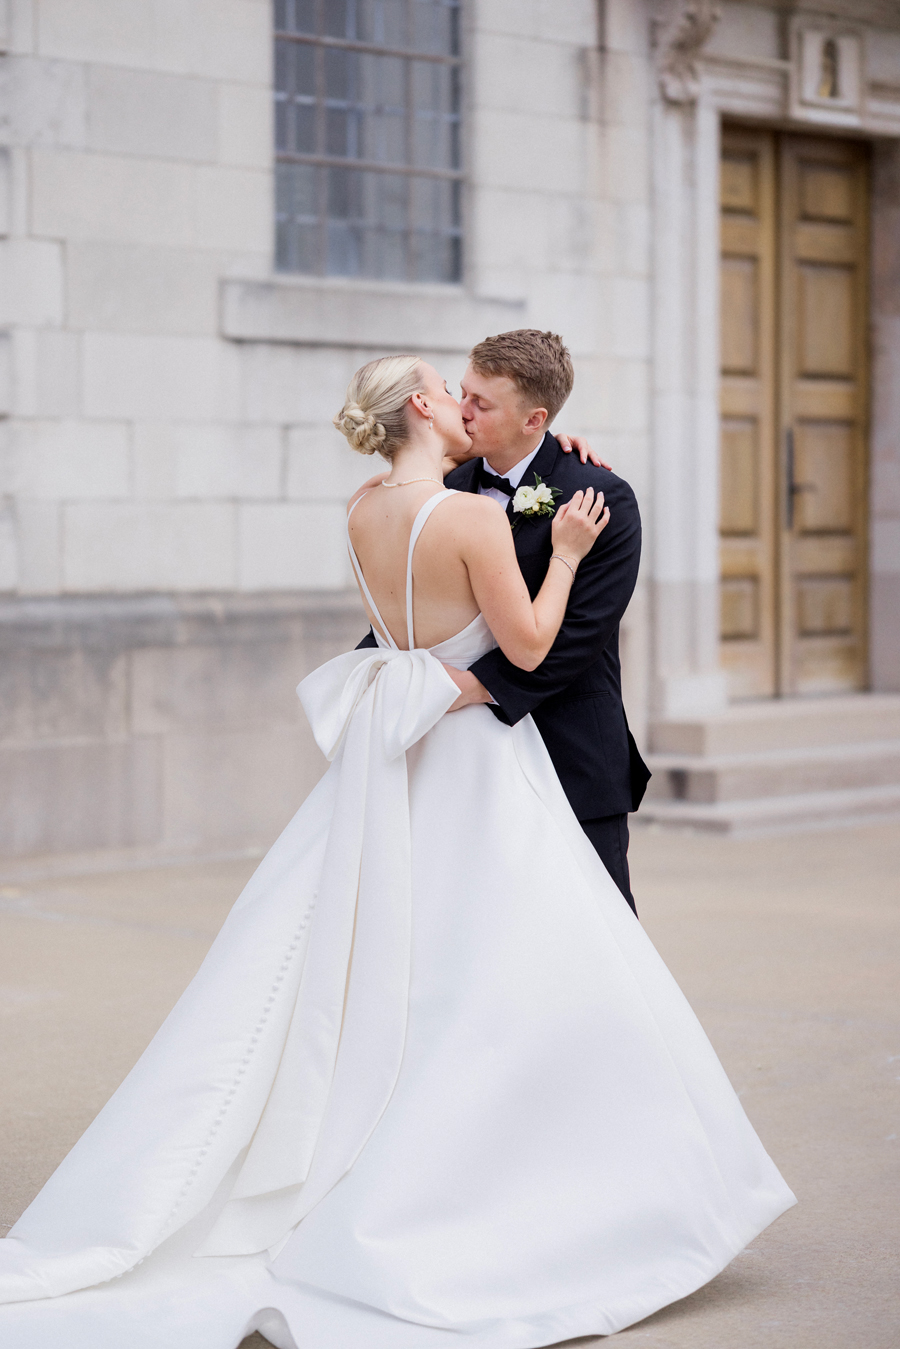 A bride and groom take portrait outside the Church of St. Mary, Aldermanbury at a Westminster College wedding by Love Tree Studios.